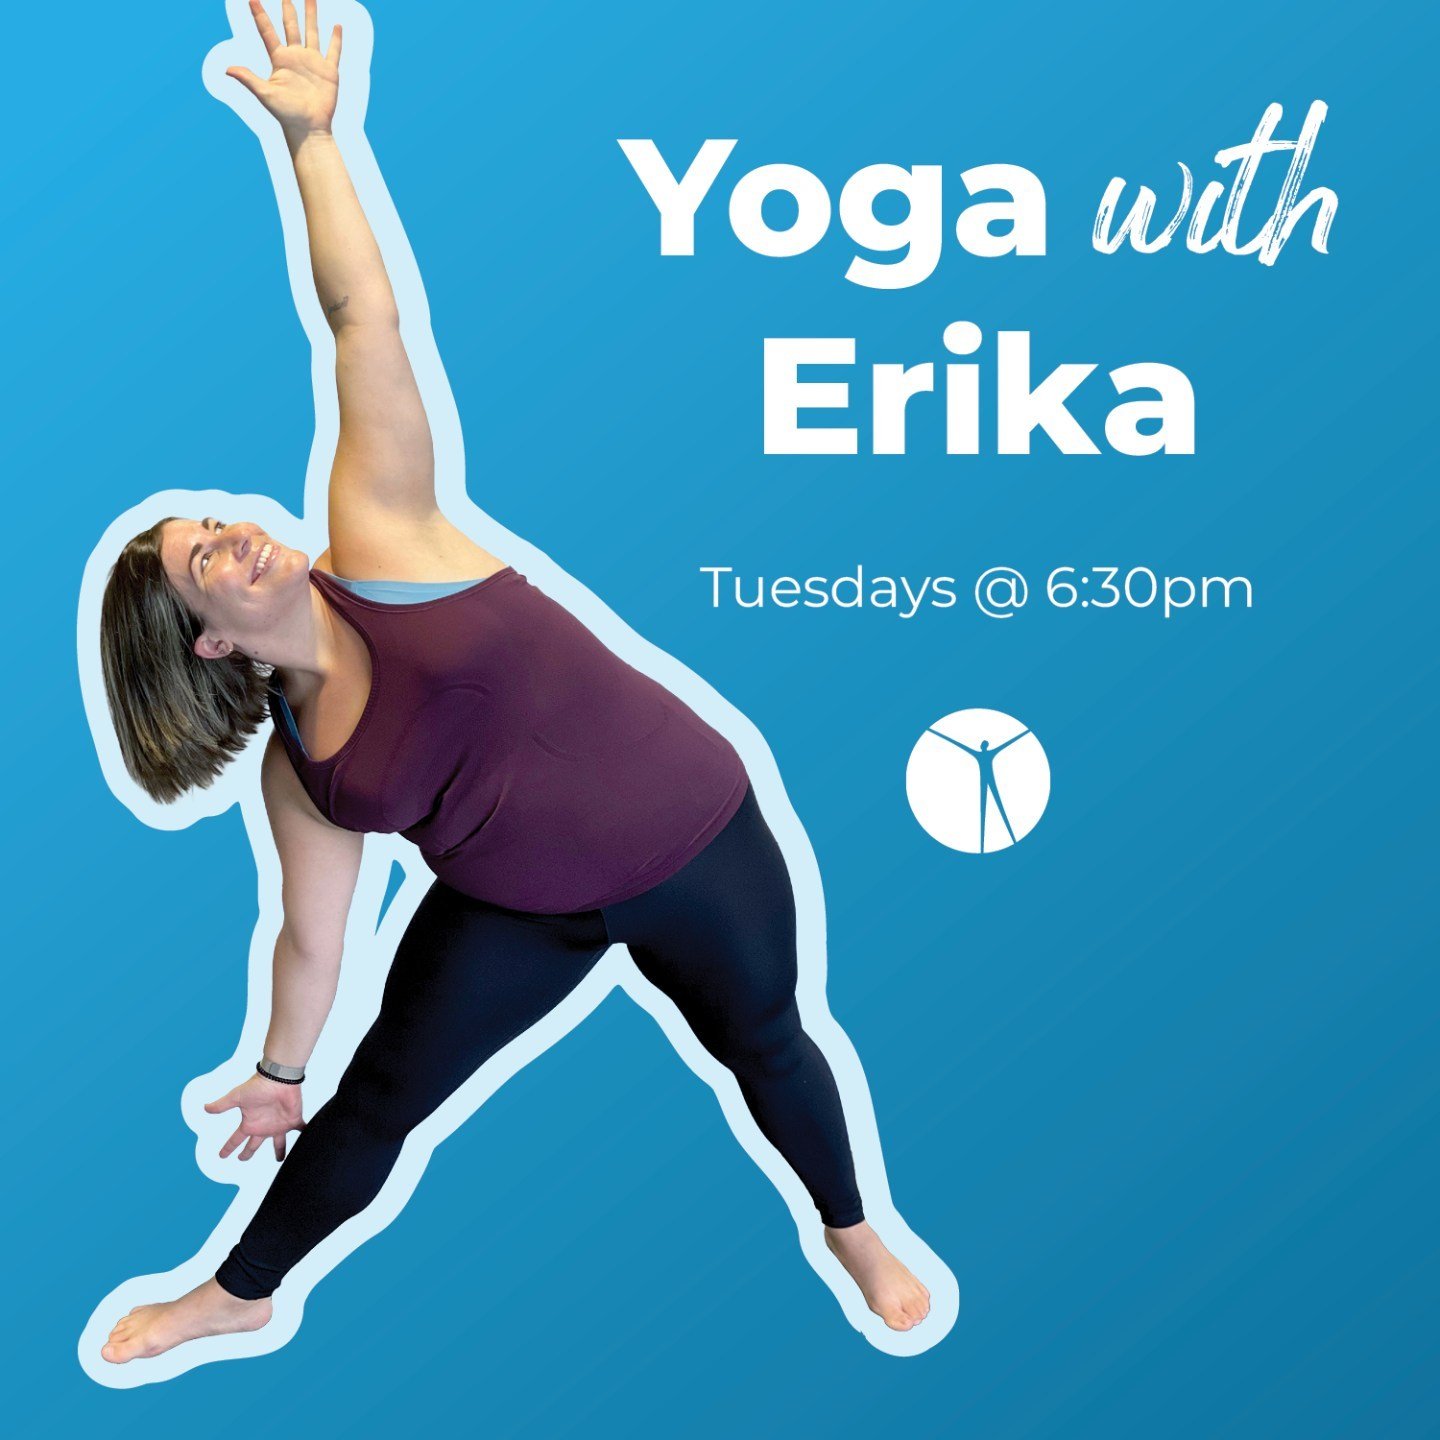 Ready to work on your flexibility &amp; mobility while also decreasing stress? Experience these benefits &ndash; and more &ndash; with a regular yoga practice.

Not sure where to start? Sign up to join Hydrathletics&rsquo; Erika every Tuesday at 6:30